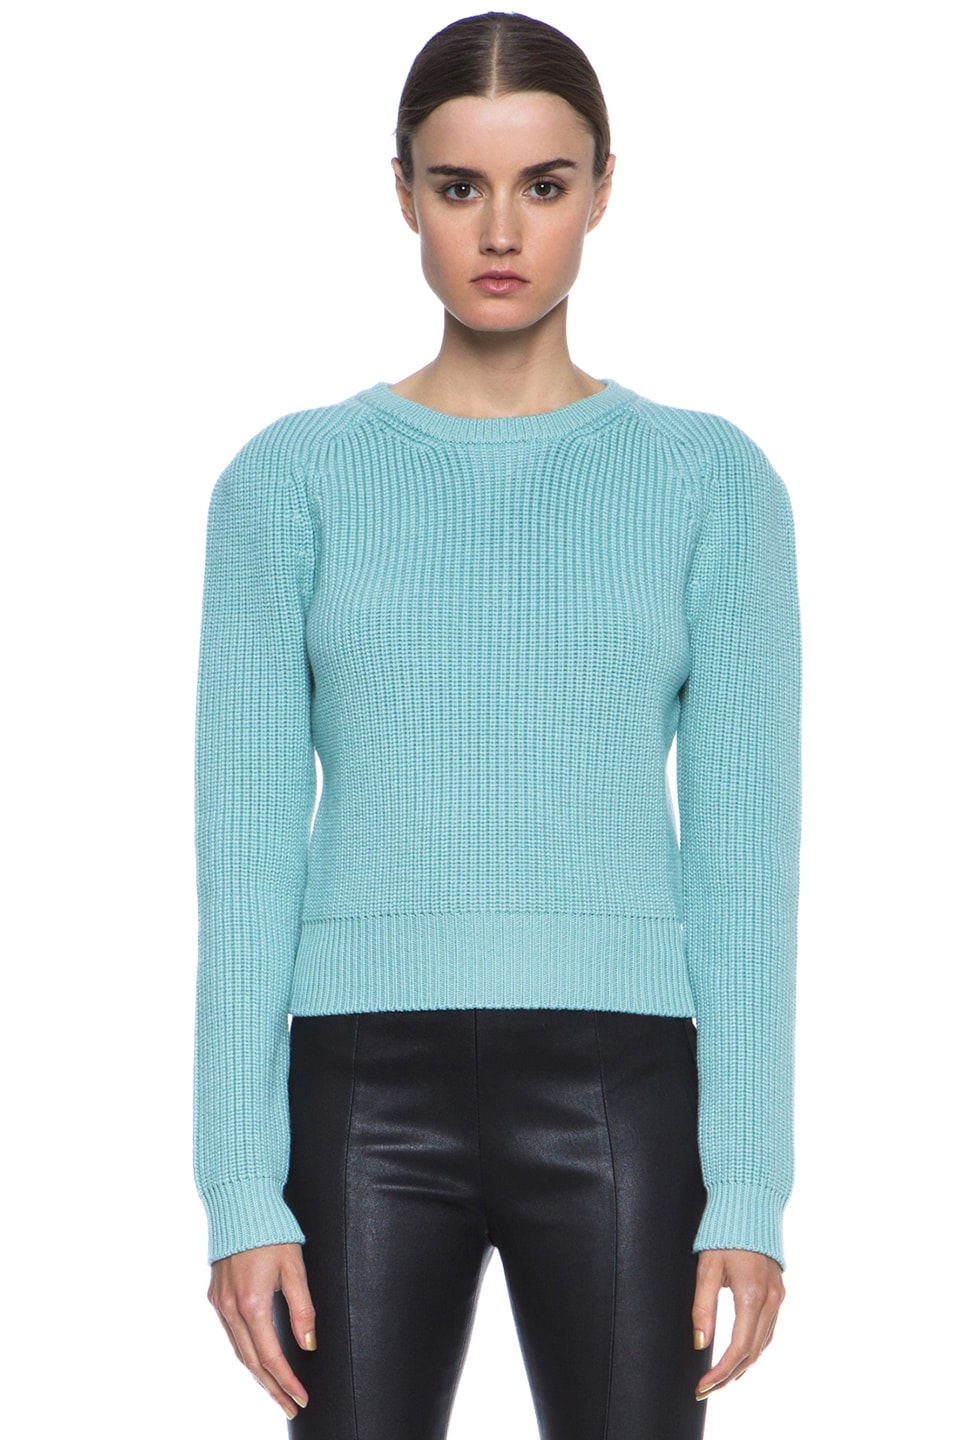 Carven Ribbed Knit Wool Crew Neck Sweater in Jade | FWRD